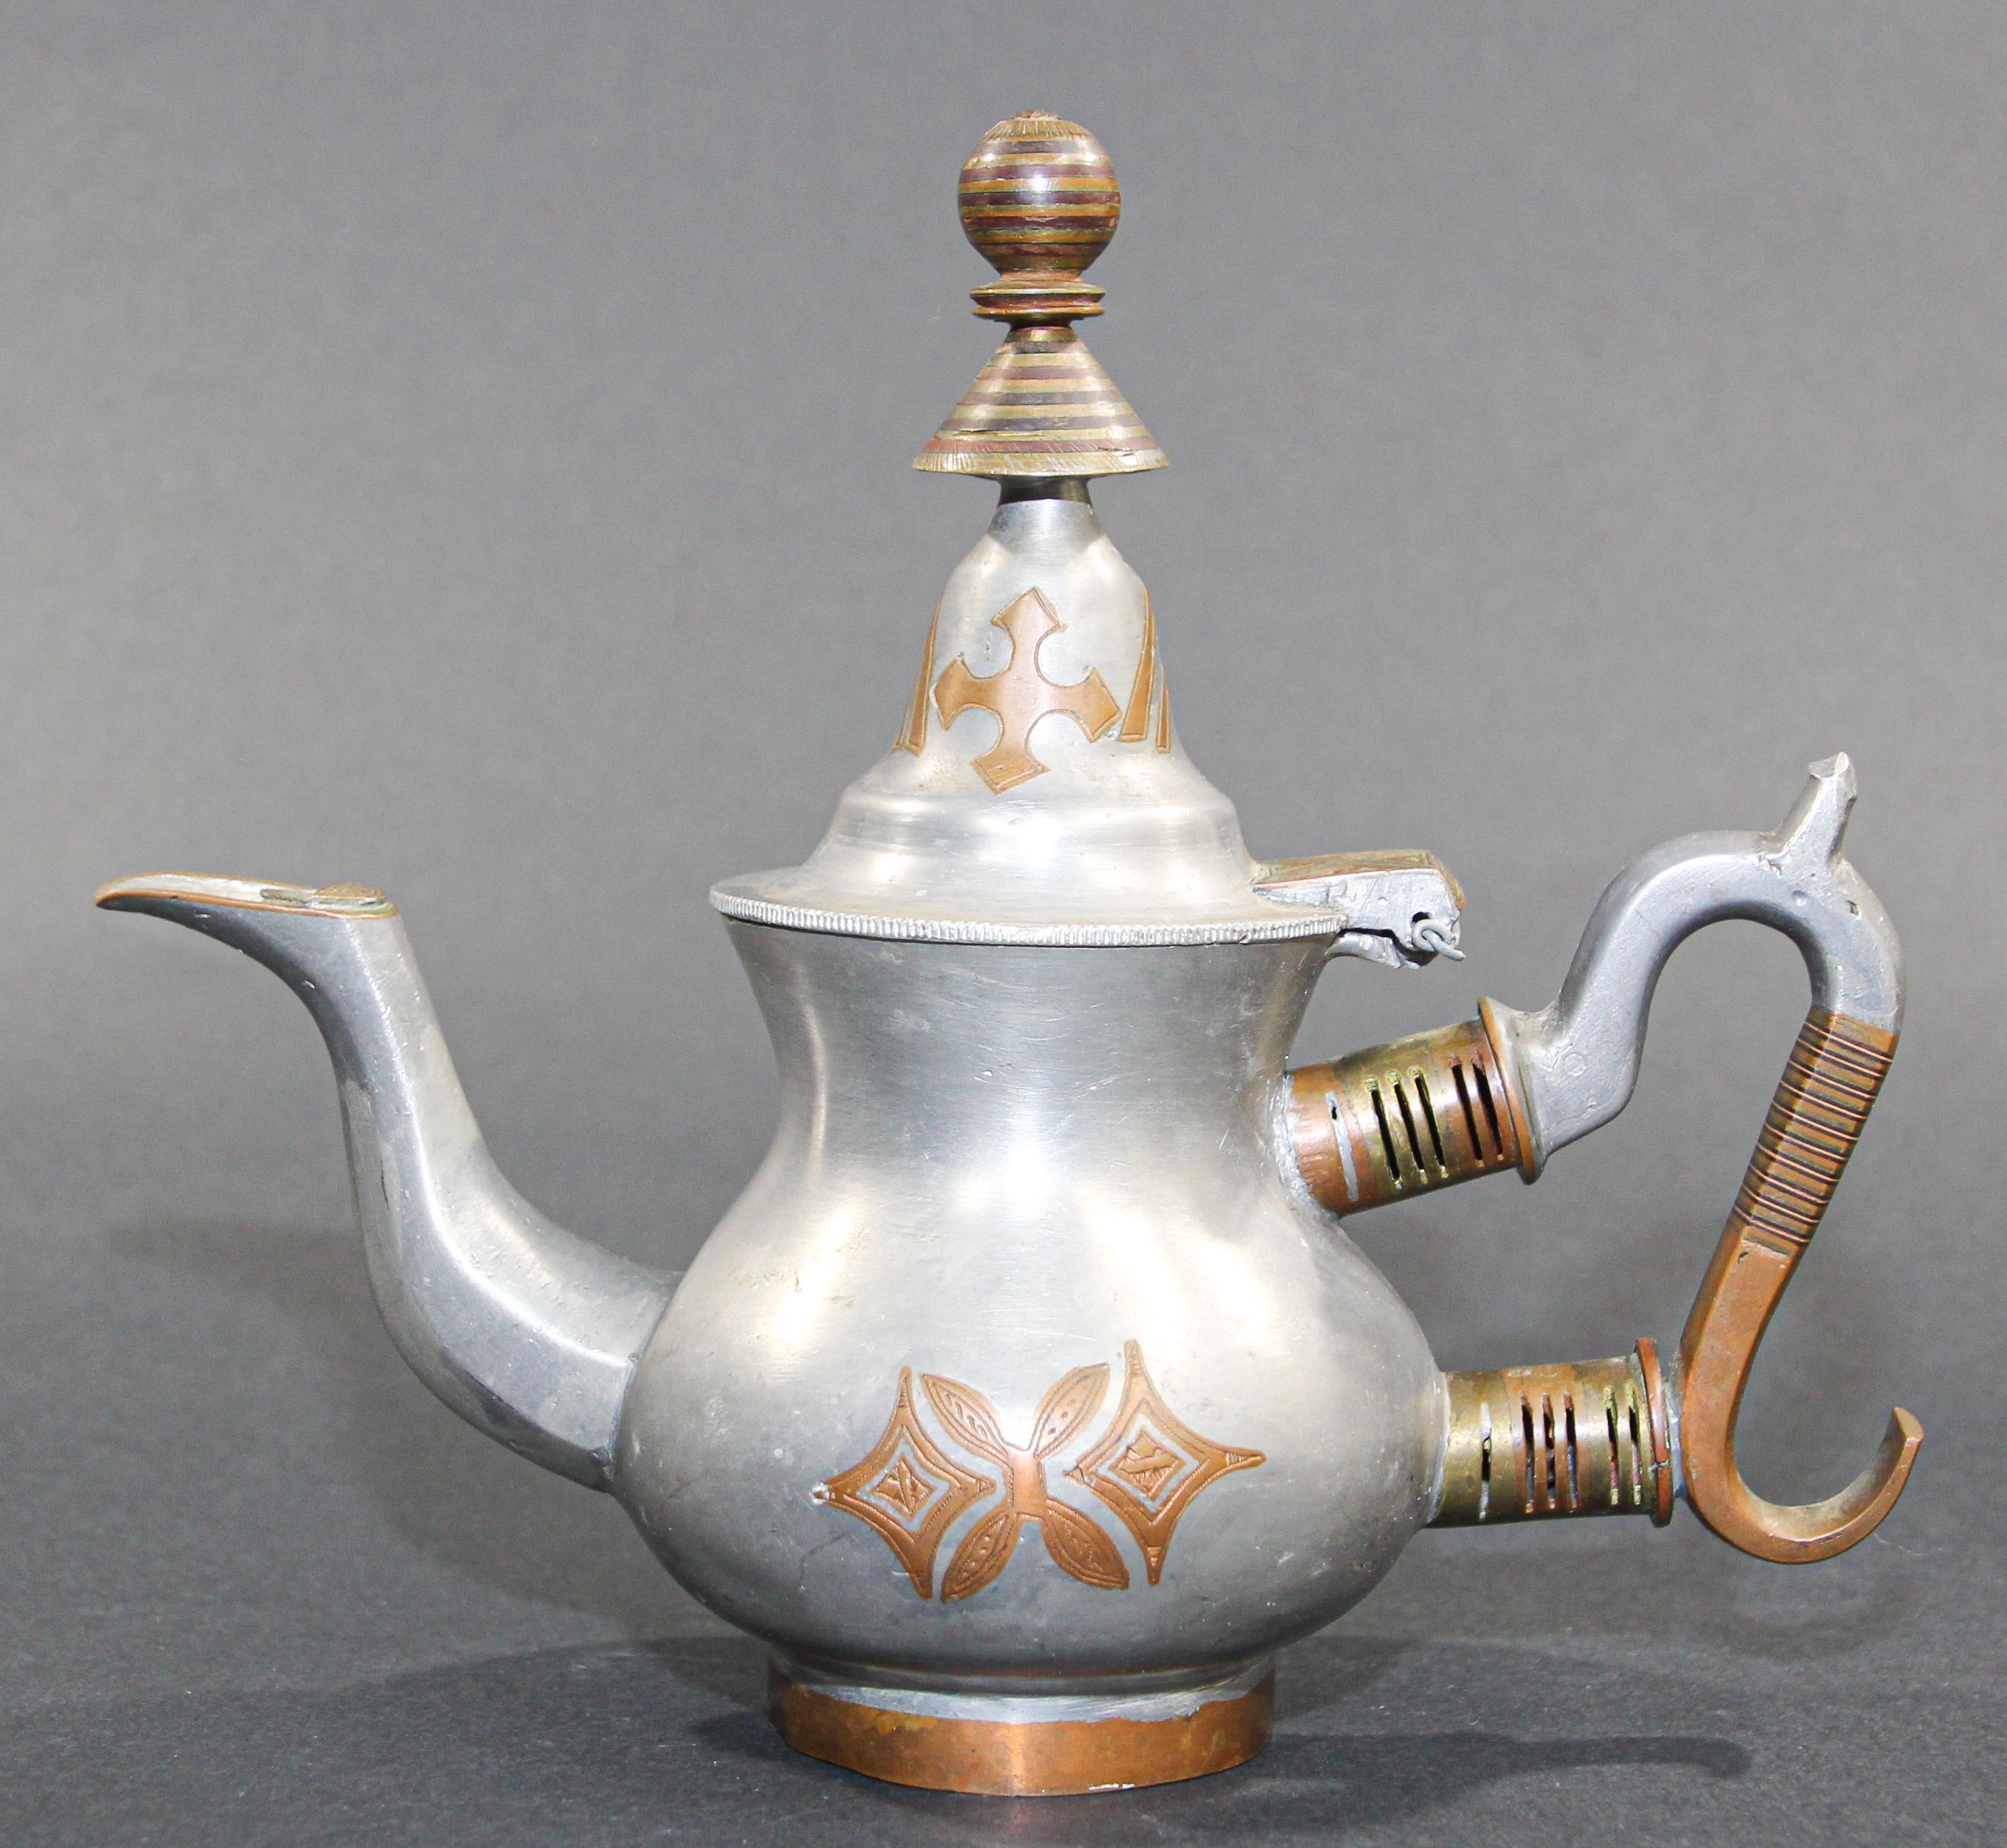 Vintage African Tuareg teapot Mauritania
Mid-20th century Tuareg teapot from Mauritania, Africa, Western Sahara.
Handcrafted of pewter, copper and brass decorations.
The Tuareg people inhabit a large area, covering almost all the middle and